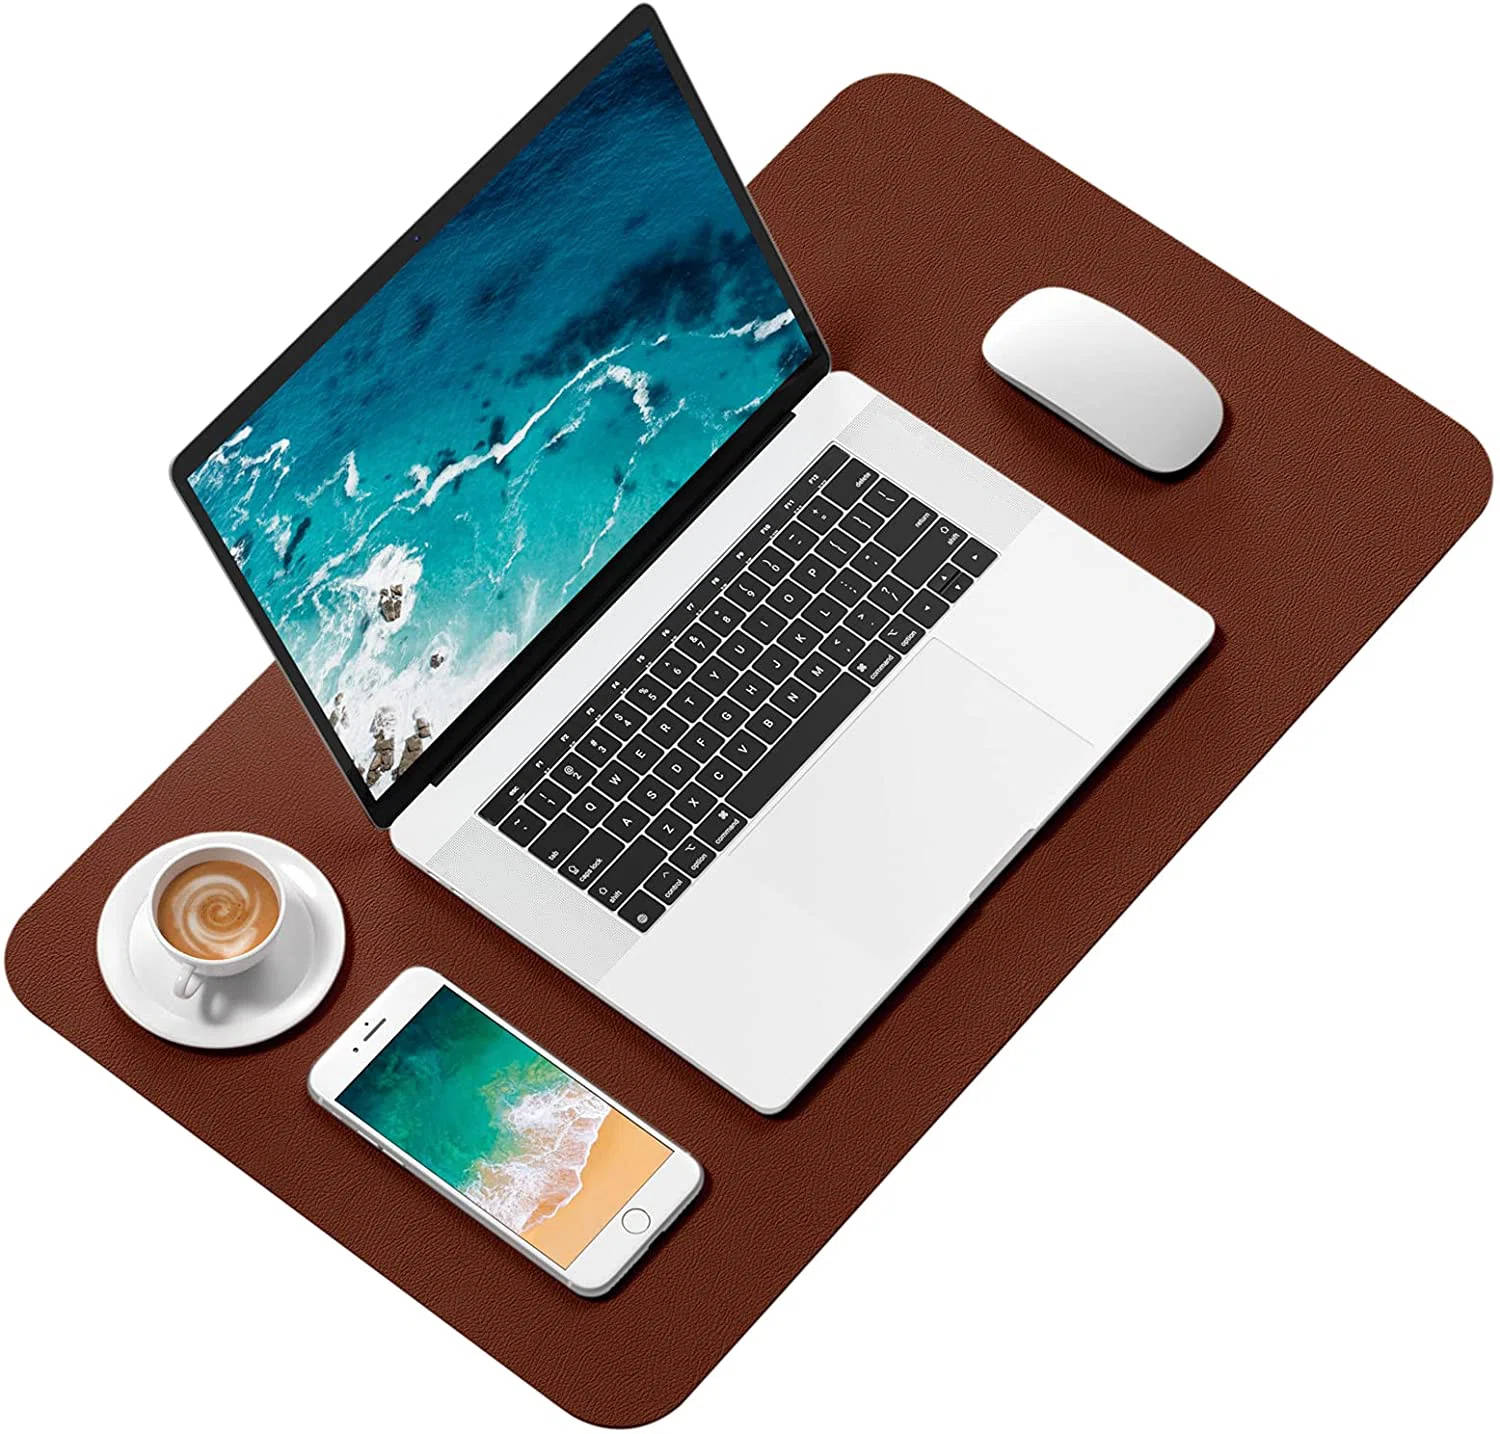 Coffee With Laptop And Accessories Wallpaper